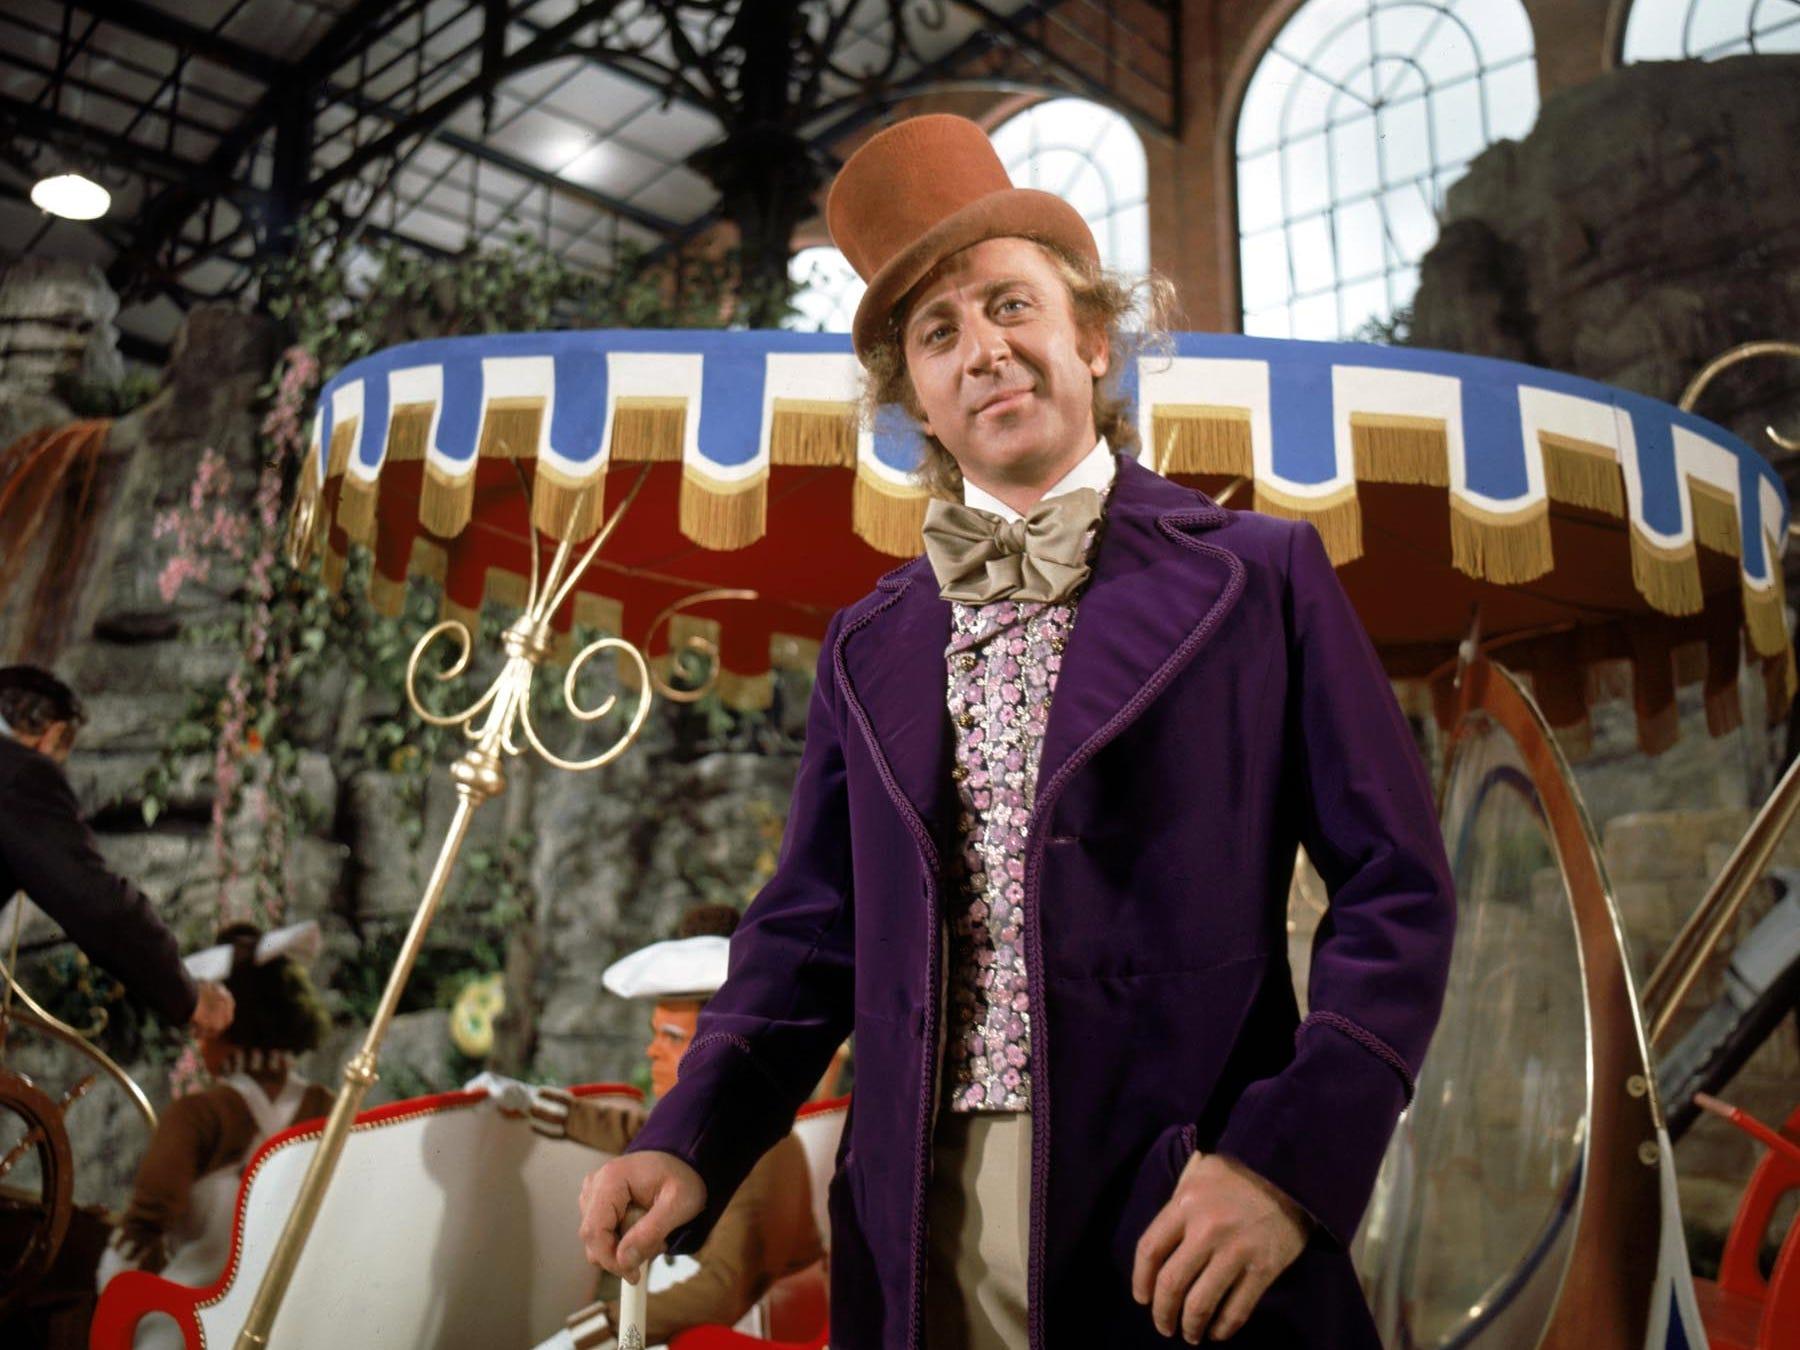 Willy Wonka' child star says Gene Wilder made sure she was looked after  on-set because her parents weren't around during filming